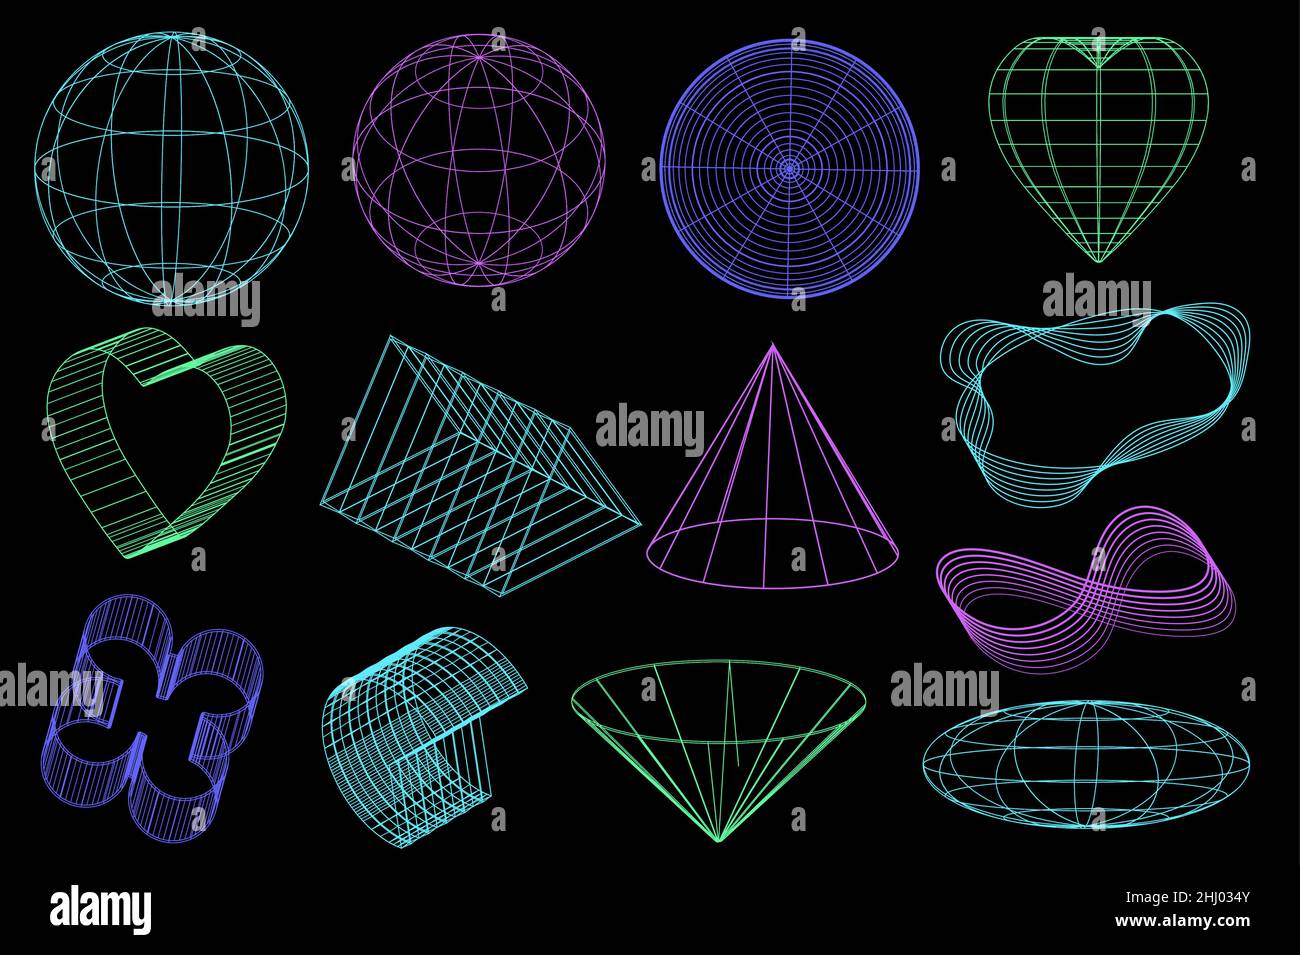 https://c8.alamy.com/comp/2HJ034Y/mesh-abstract-shapes-with-globe-in-minimal-style-set-futuristic-elements-and-retrofuturistic-shapes-set-of-neo-memphis-vaporwave-vector-2HJ034Y.jpg